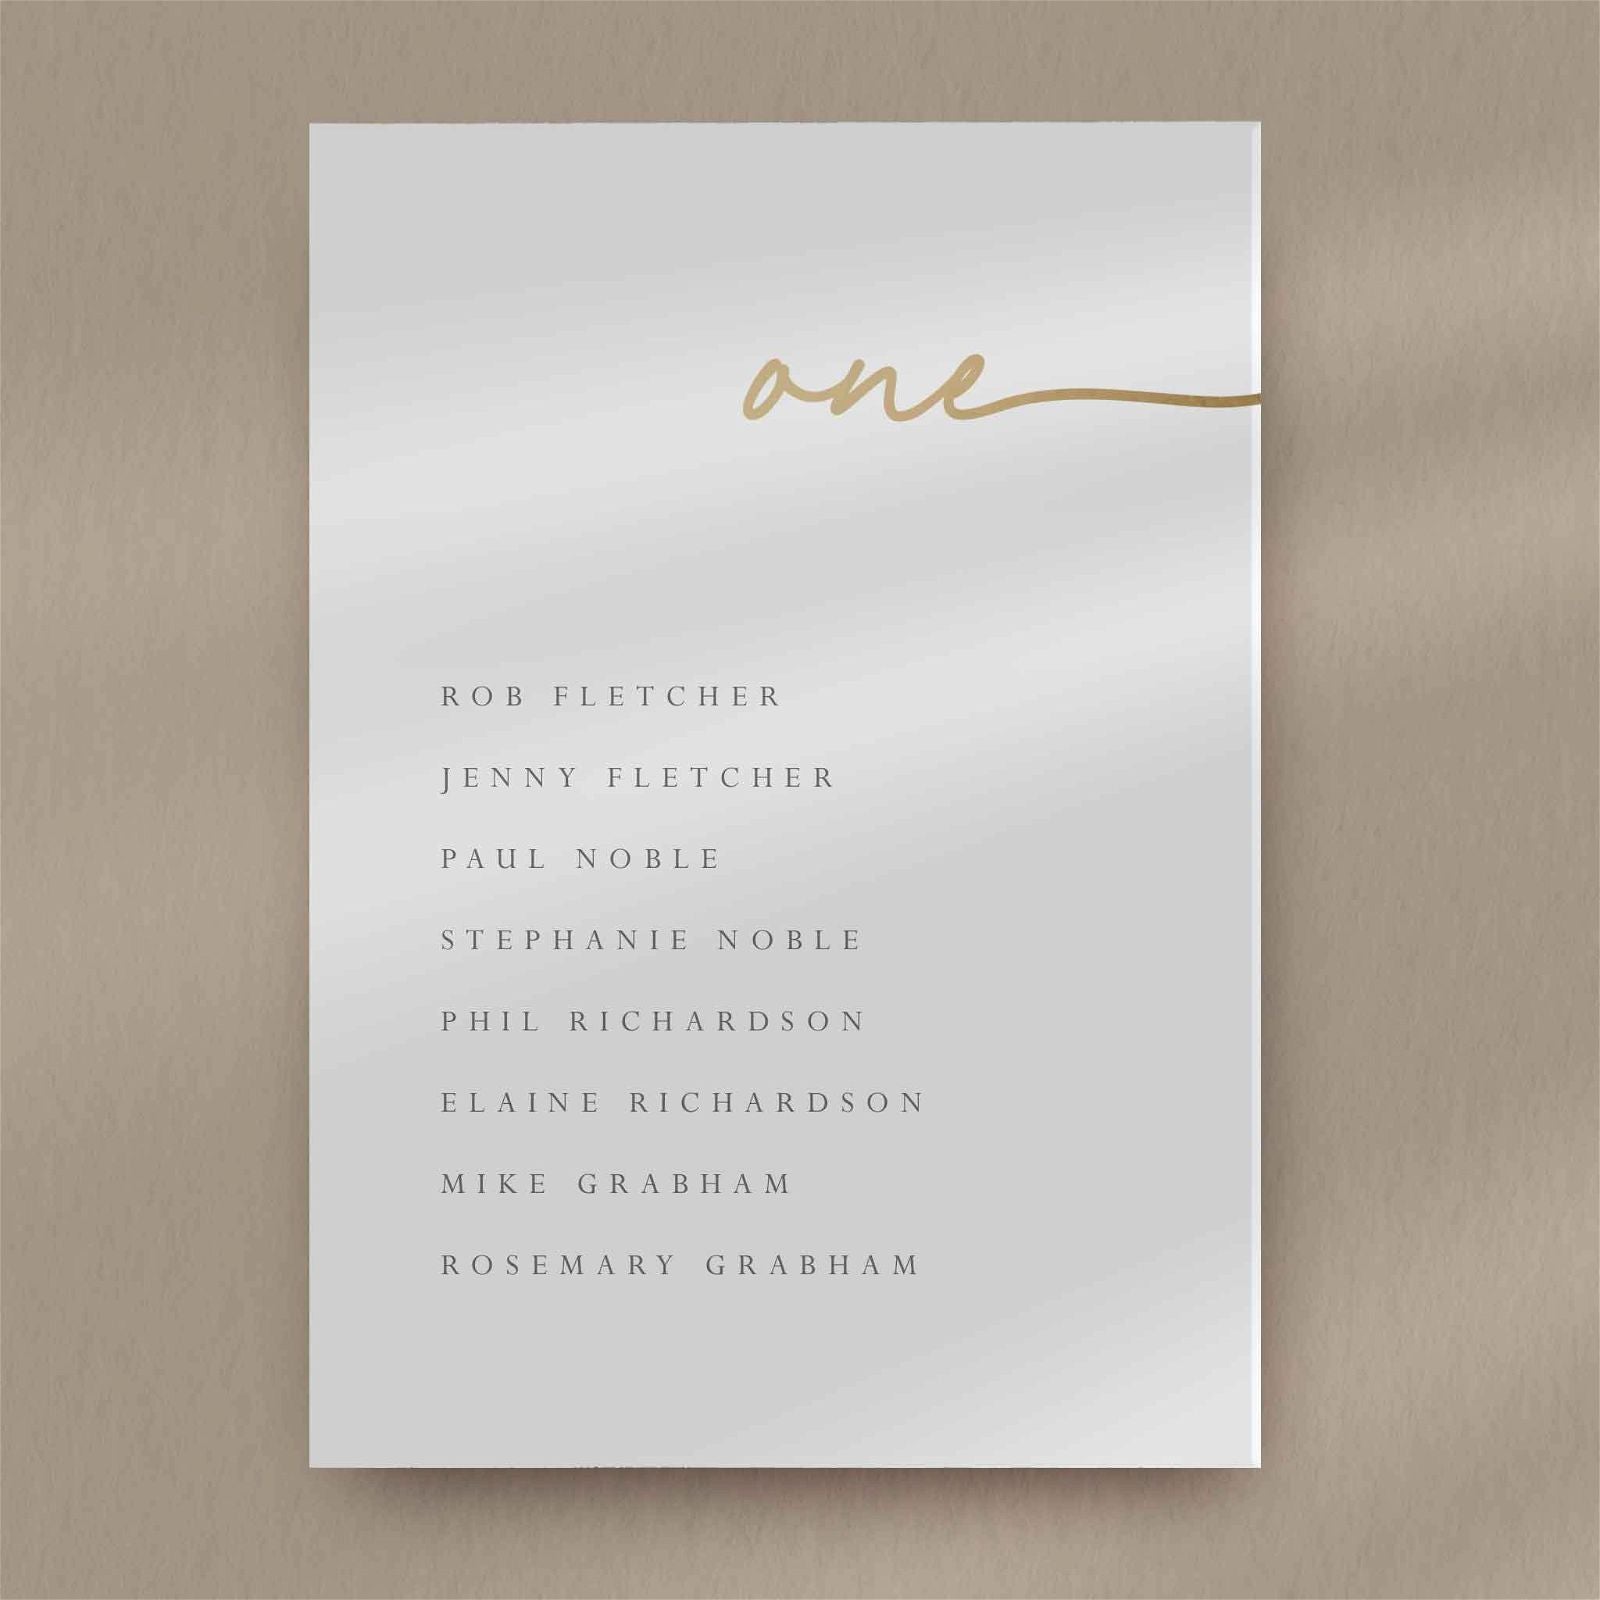 Emily Seating Plan Card  Ivy and Gold Wedding Stationery   